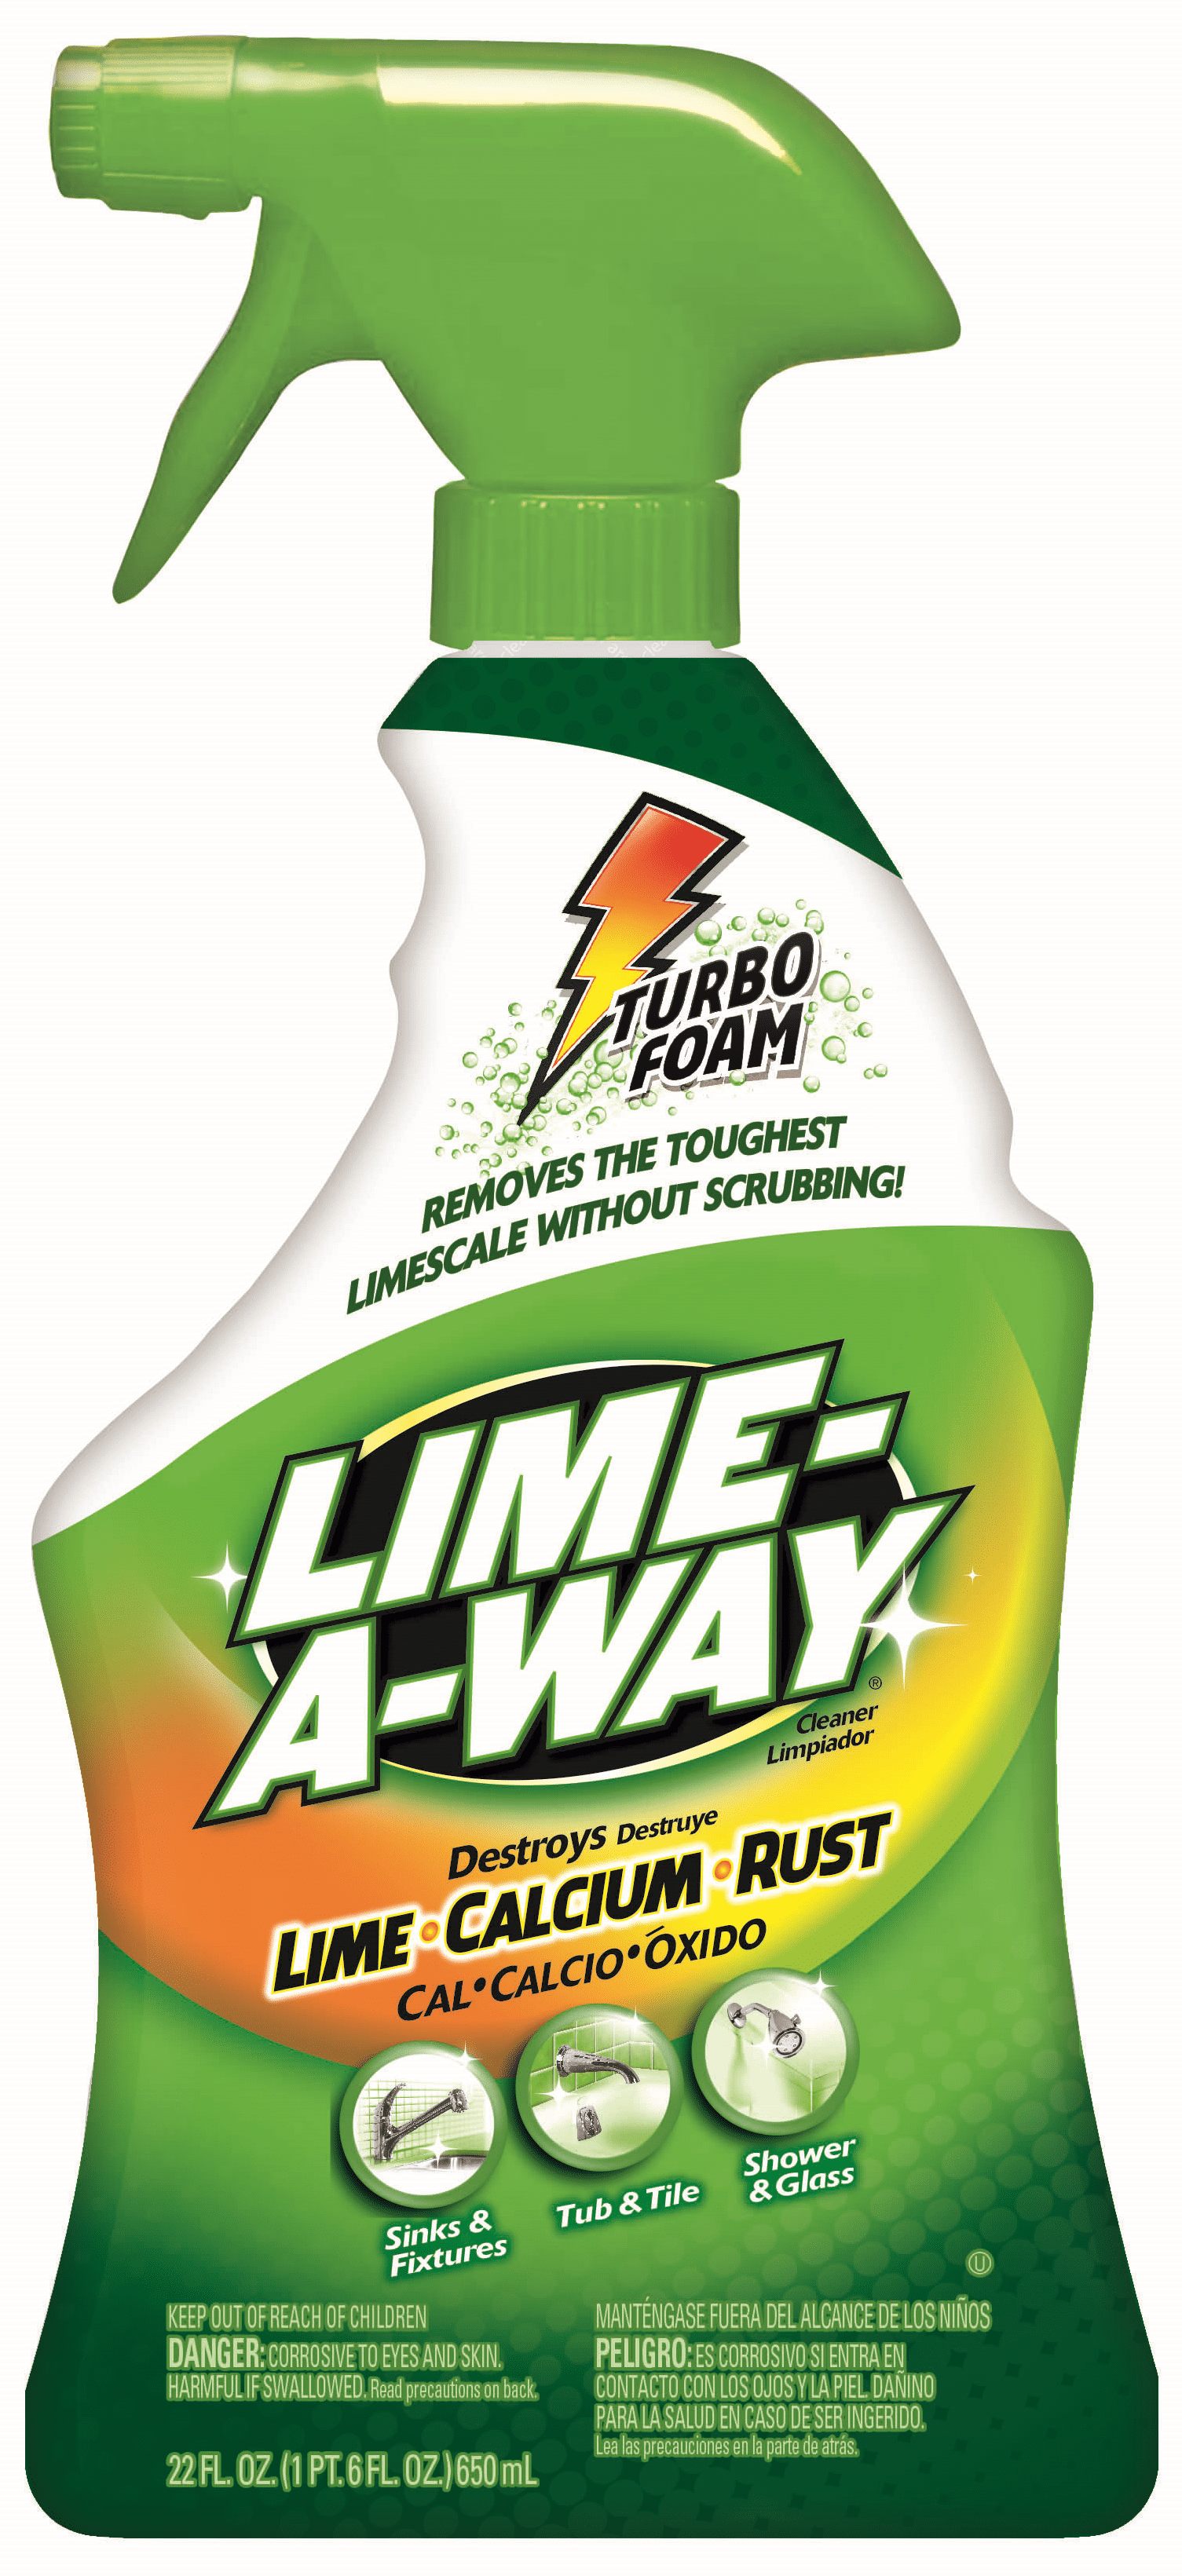 LIME-A-WAY Bathroom cleanr, Removes Lime Calcium Rust, 22 Ounce Bottle